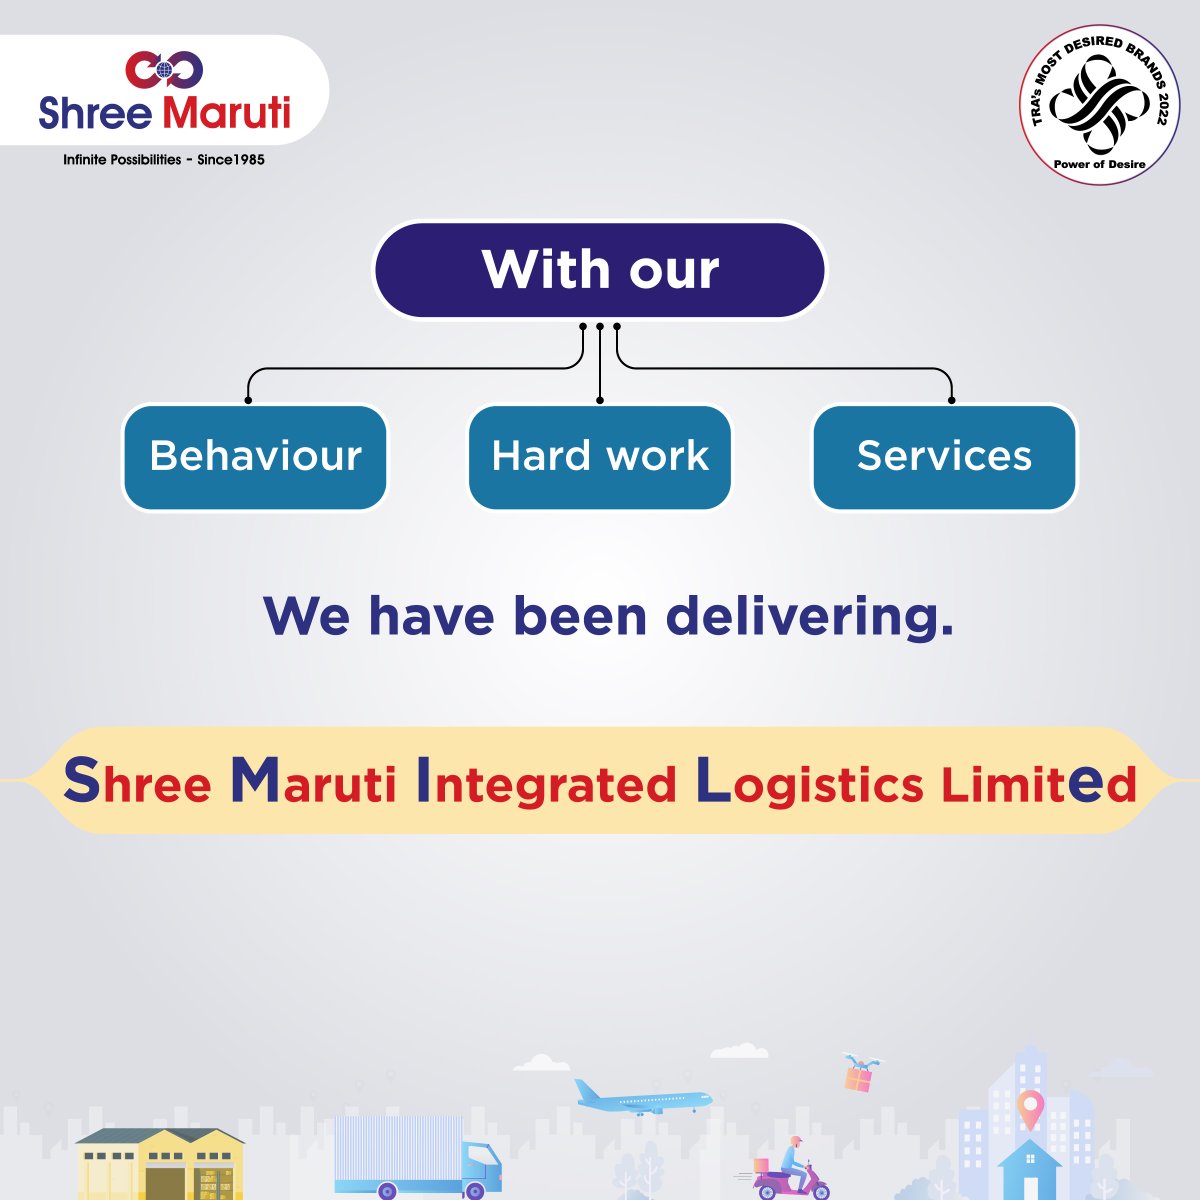 Delivering SMILES through our unwavering commitment, hard work, and exceptional services. 🚚💪😊
.
.
#WeSpeakDelivery #logisticscompany #cargo #supplychainmanagement #deliveryindia #Indianlogistics #shippingmanagement #cargoservices #ShreeMaruti #EcommerceDelivery